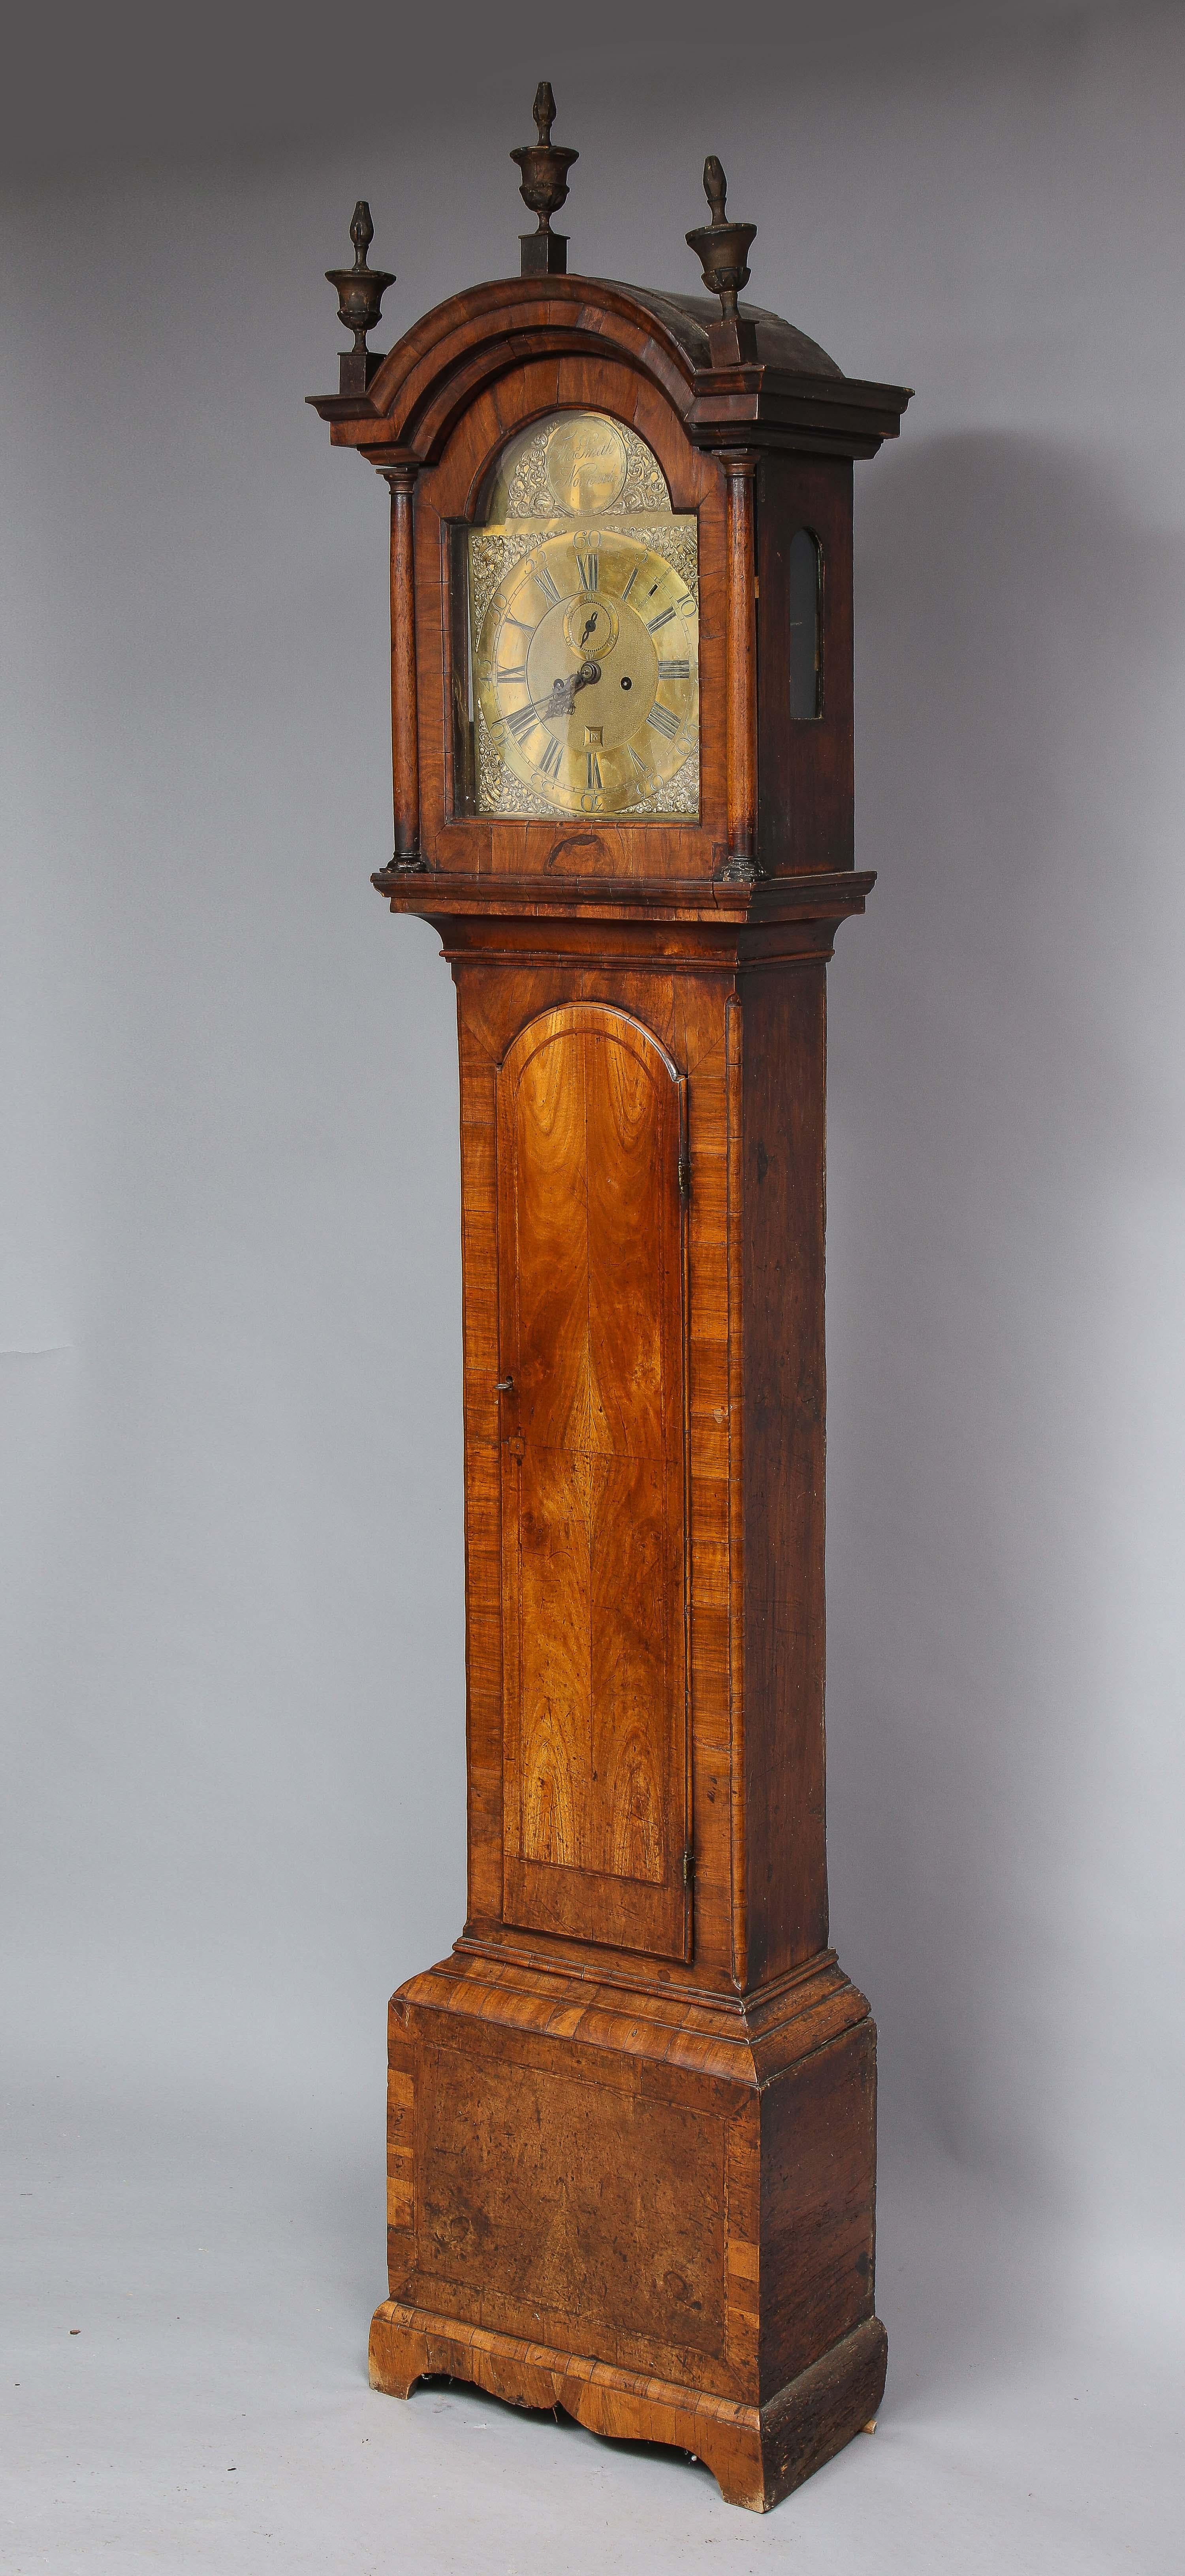 Fine 8 day tall case clock by Thomas Smith of Norwich, the three original giltwood urn finials over arched hood having molded cornice, the brass dial with engraved boss reading 